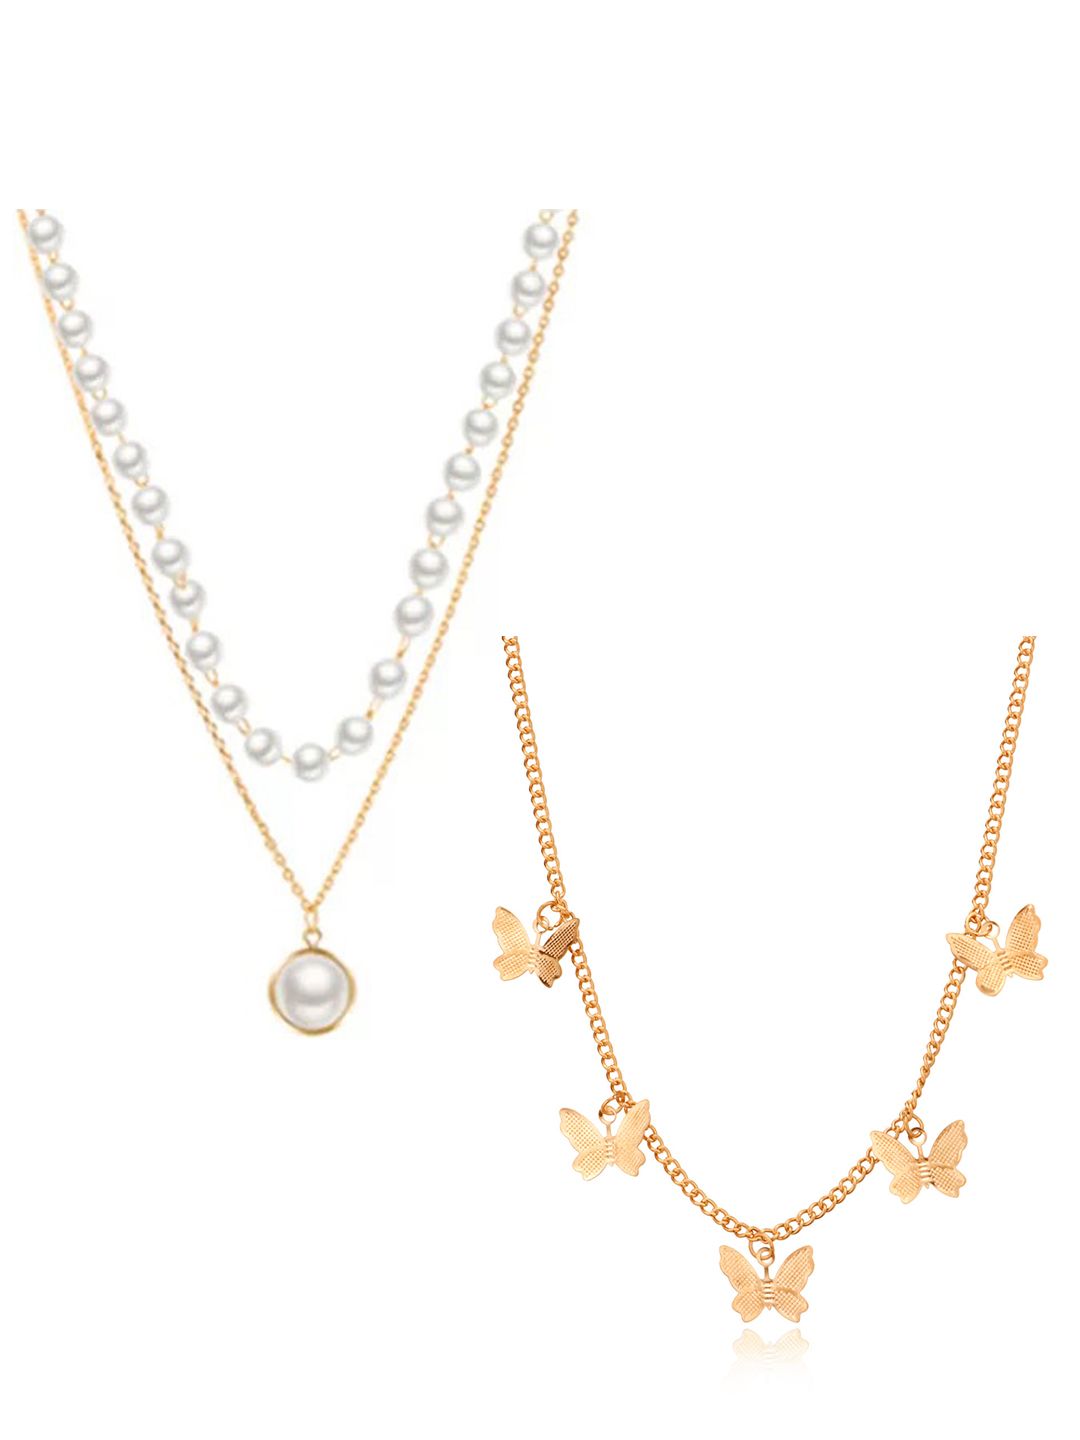 Vembley Set Of 2 Gold-Toned & White Pearl Double Layered & Butterfly Necklace Price in India